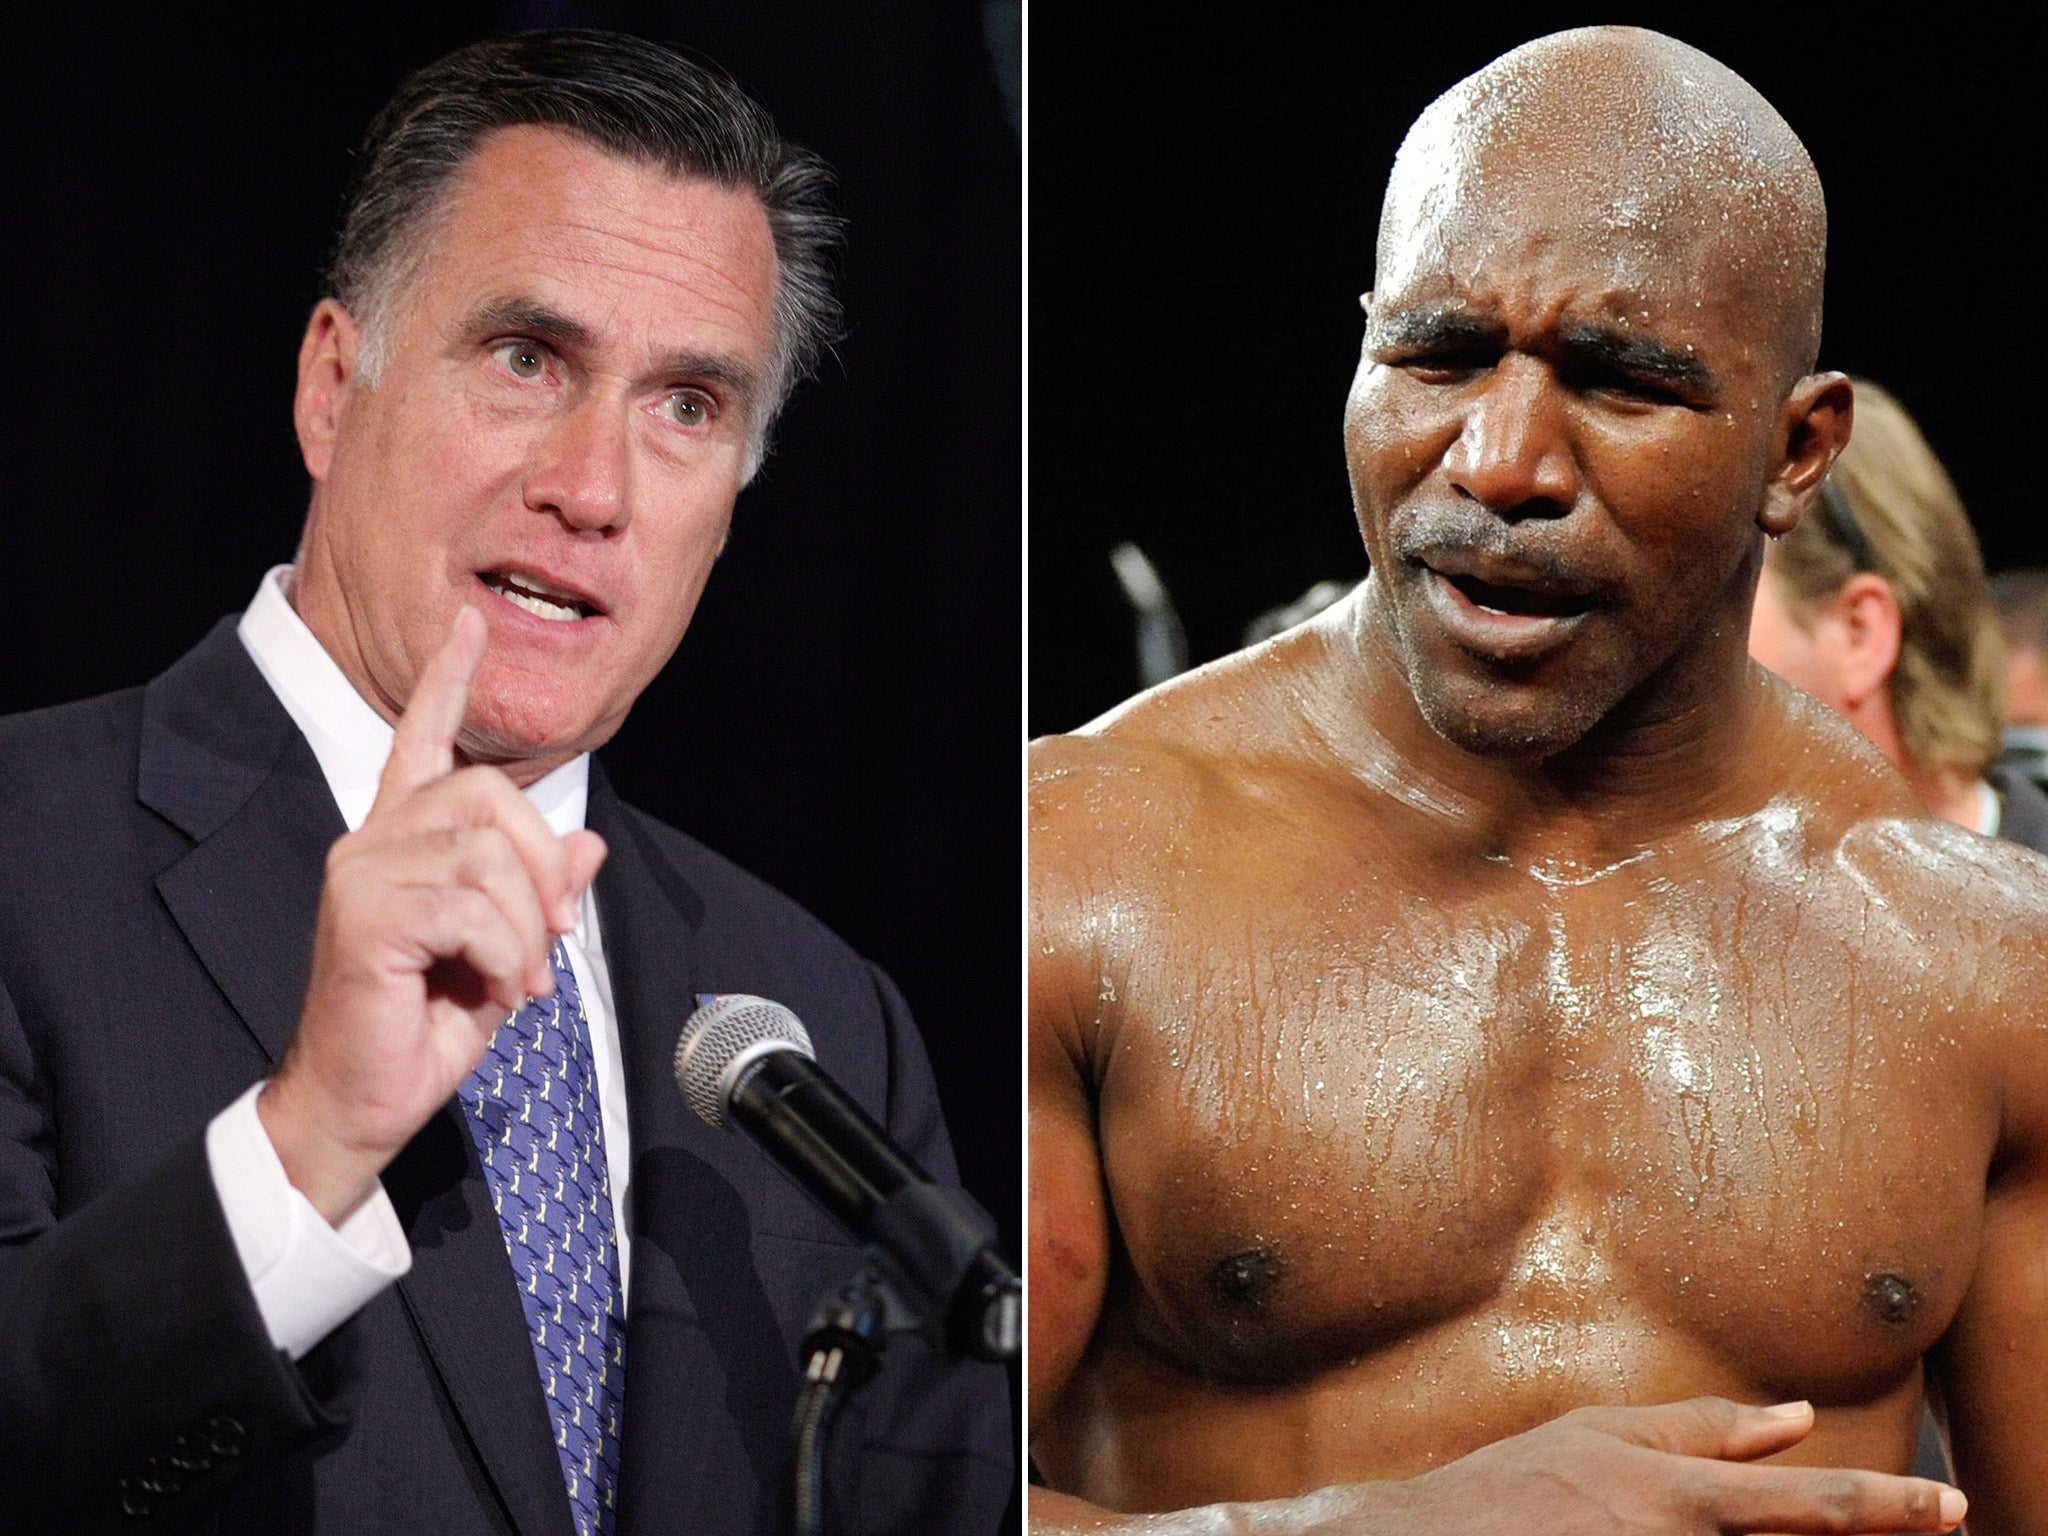 Former Republican presidential contender and the former heavyweight world champion Evander Holyfield